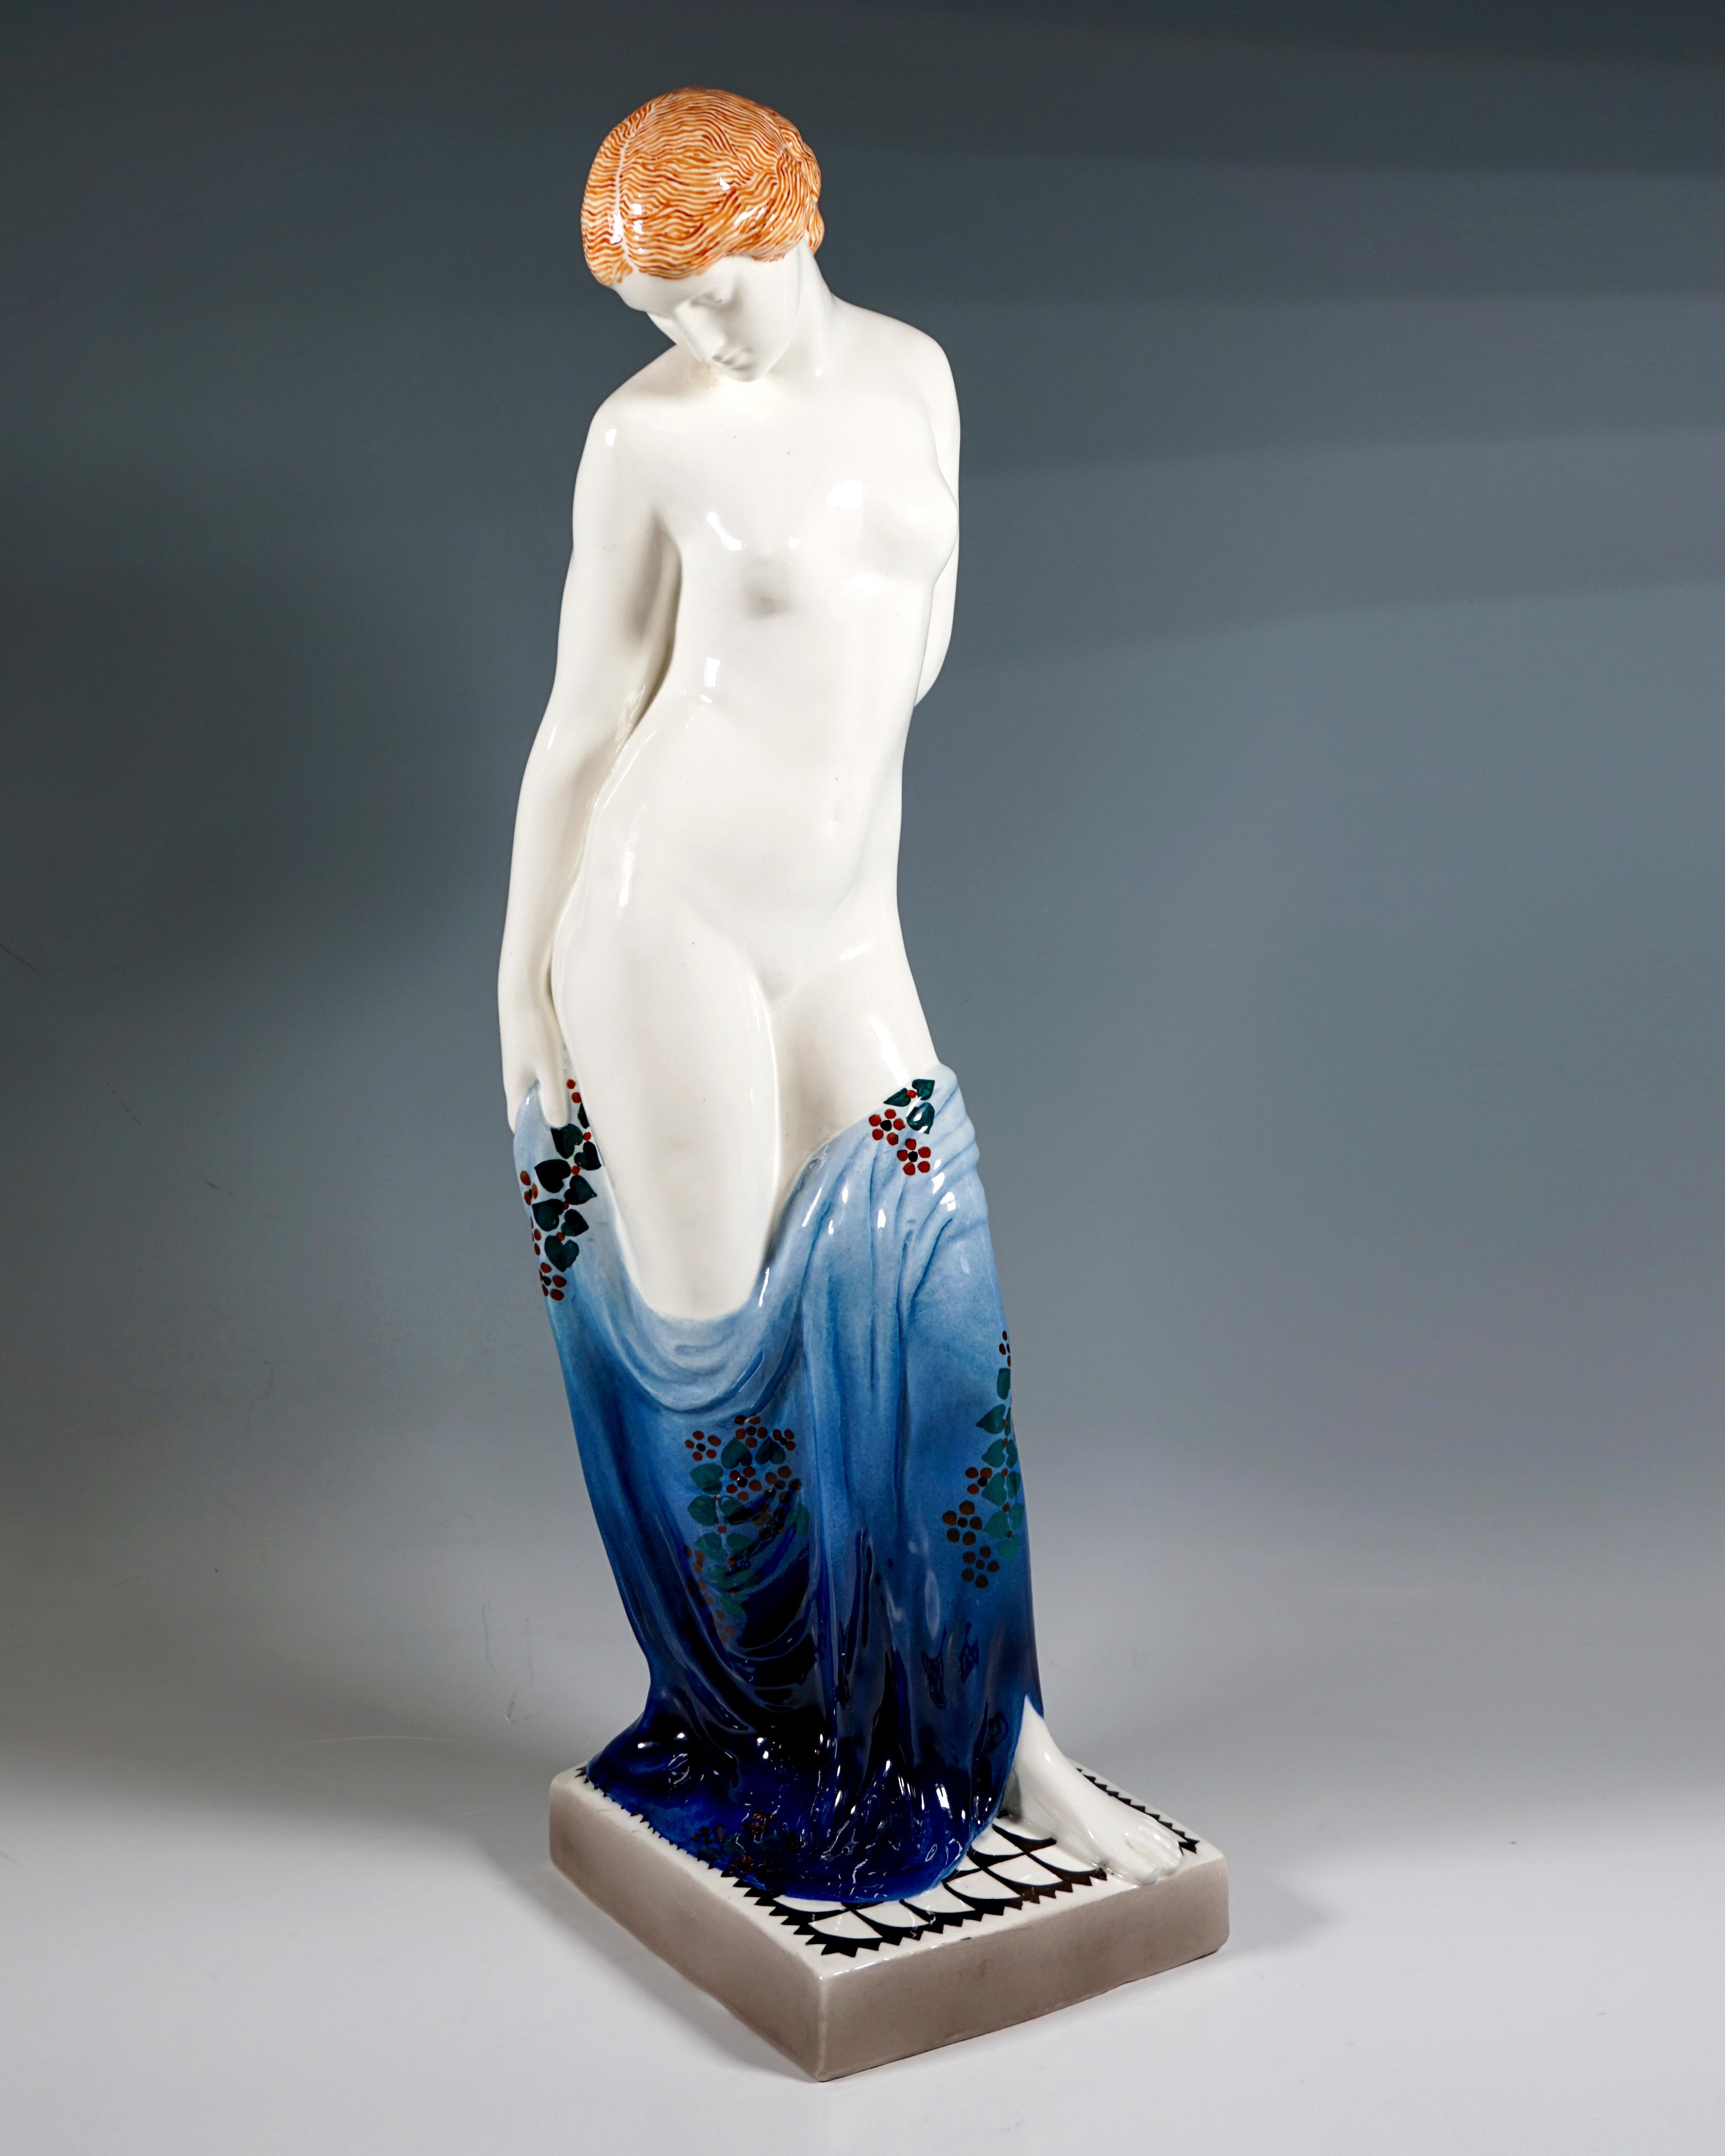 Very large and rare Goldscheider Vienna ceramic figurine:
Art Déco execution of an Art Nouveau design around 1909: young woman as the personification of beauty, with hair tied at the nape of the neck, head tilted to the side and looking down,